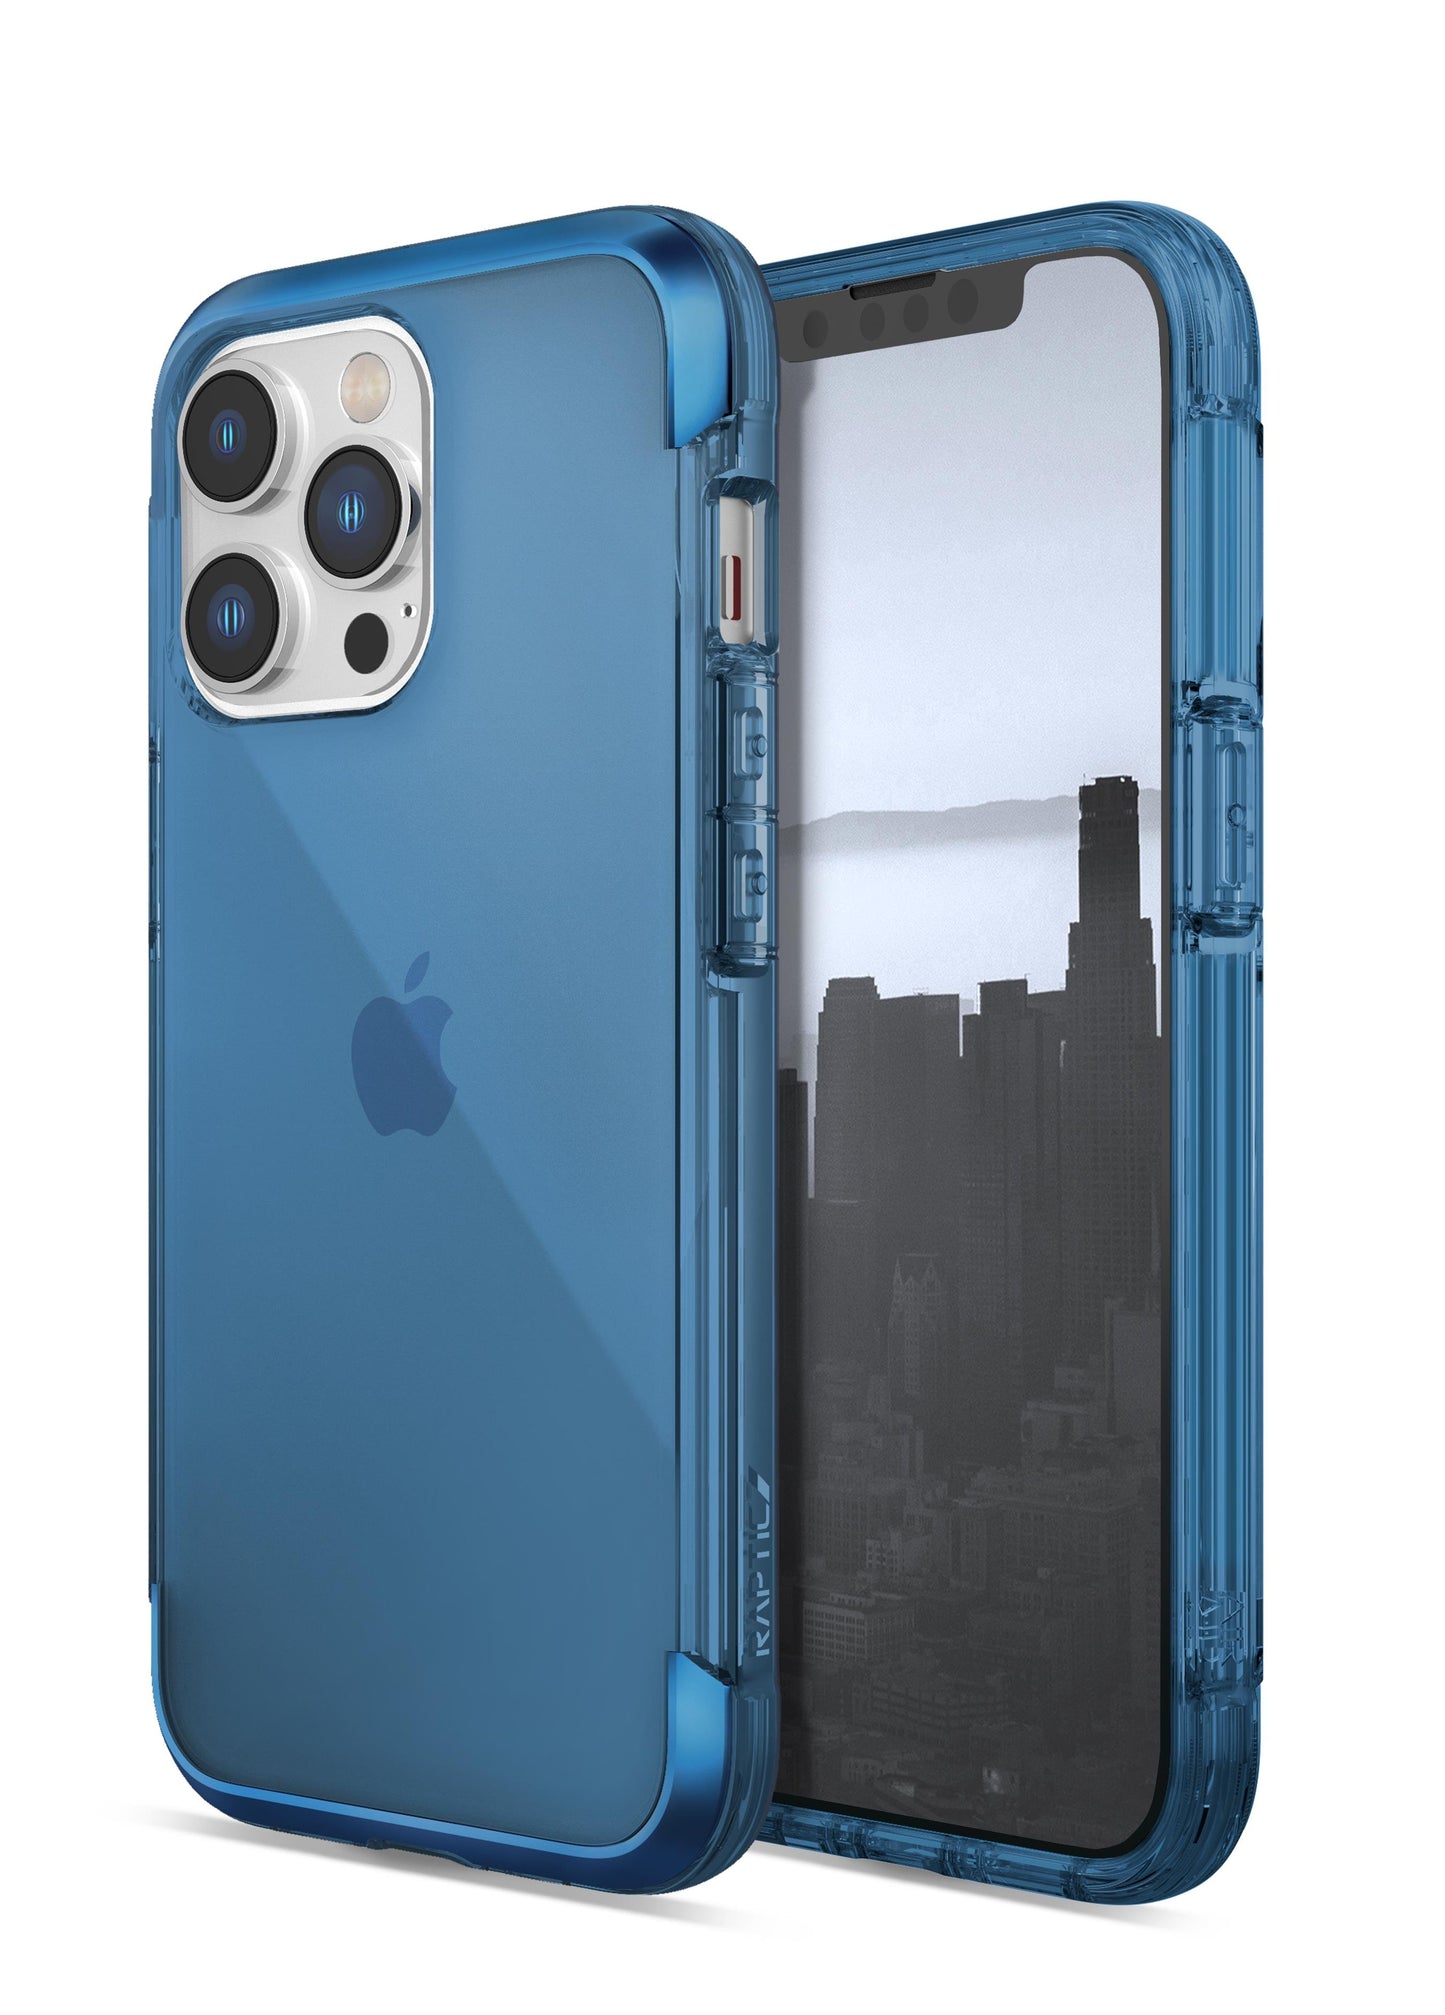 The lightweight iPhone 14 Pro Air Case - Raptic Air is shown in blue.